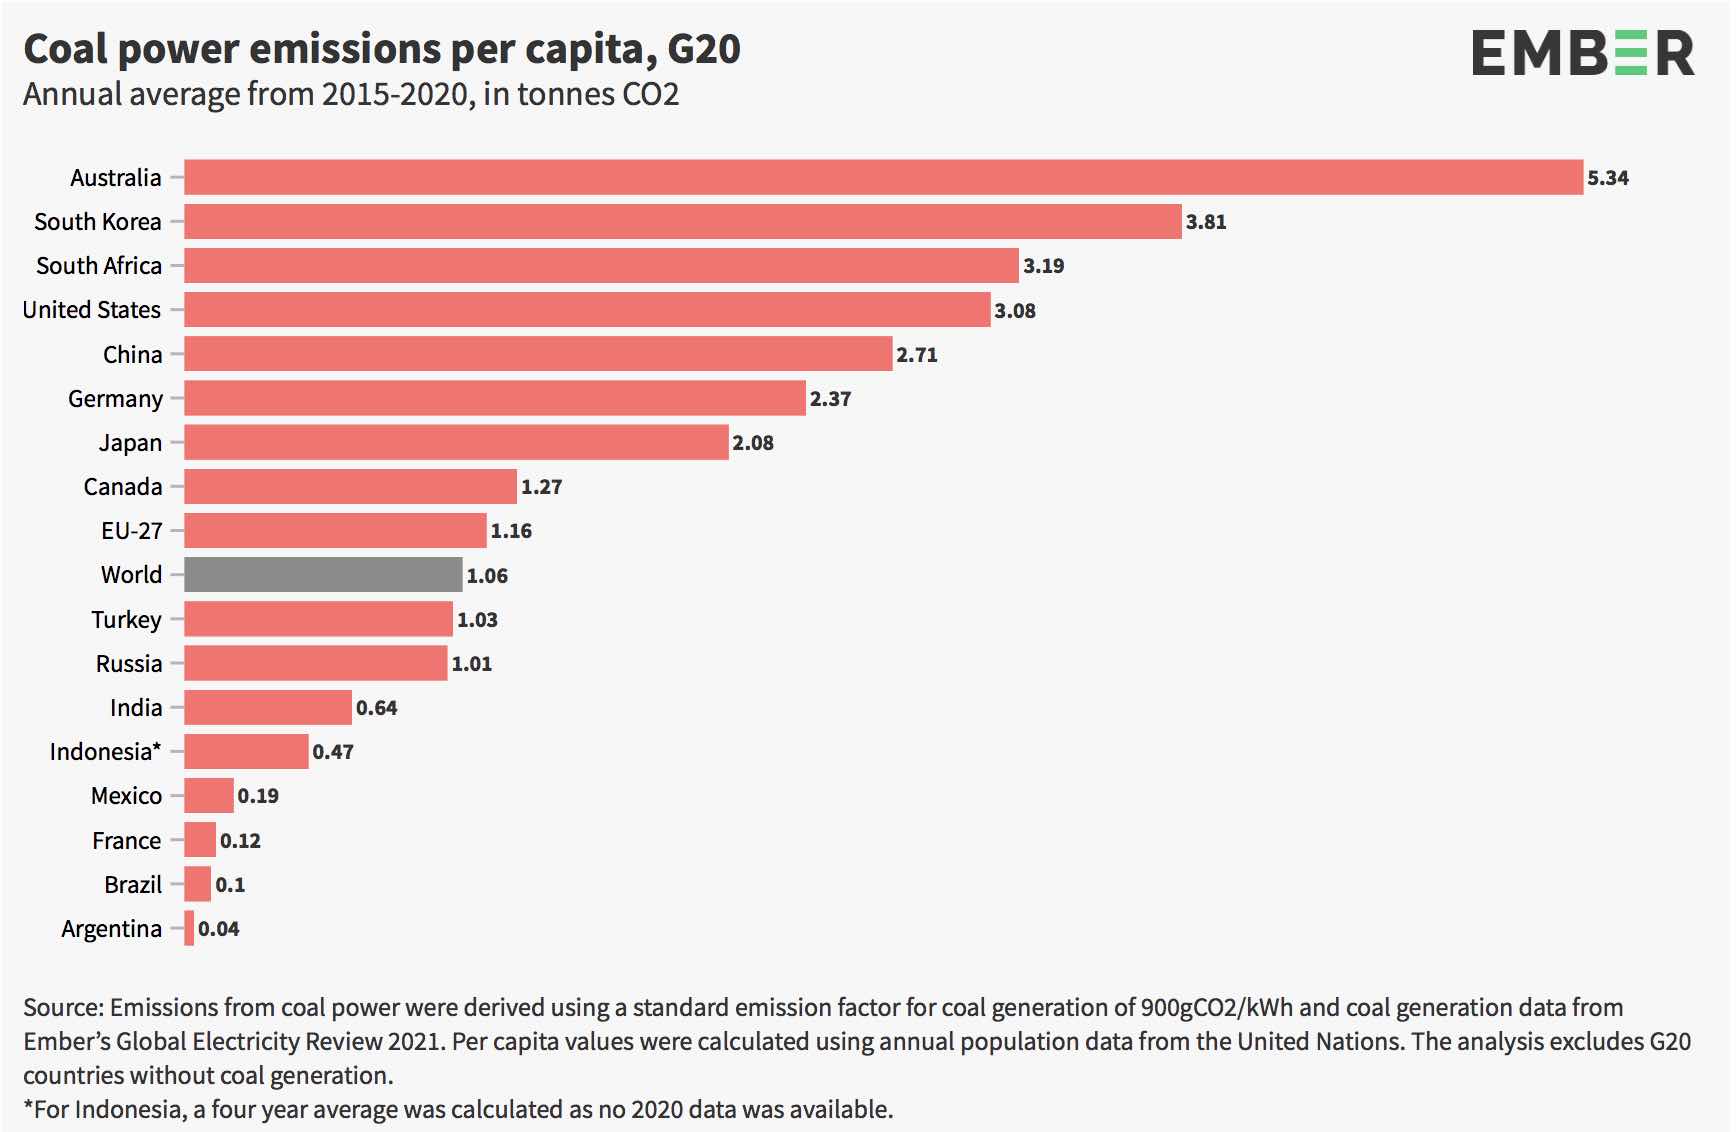 This image shows the coal power emissions per capita for  the G20 nations with Australia having the highest use per person